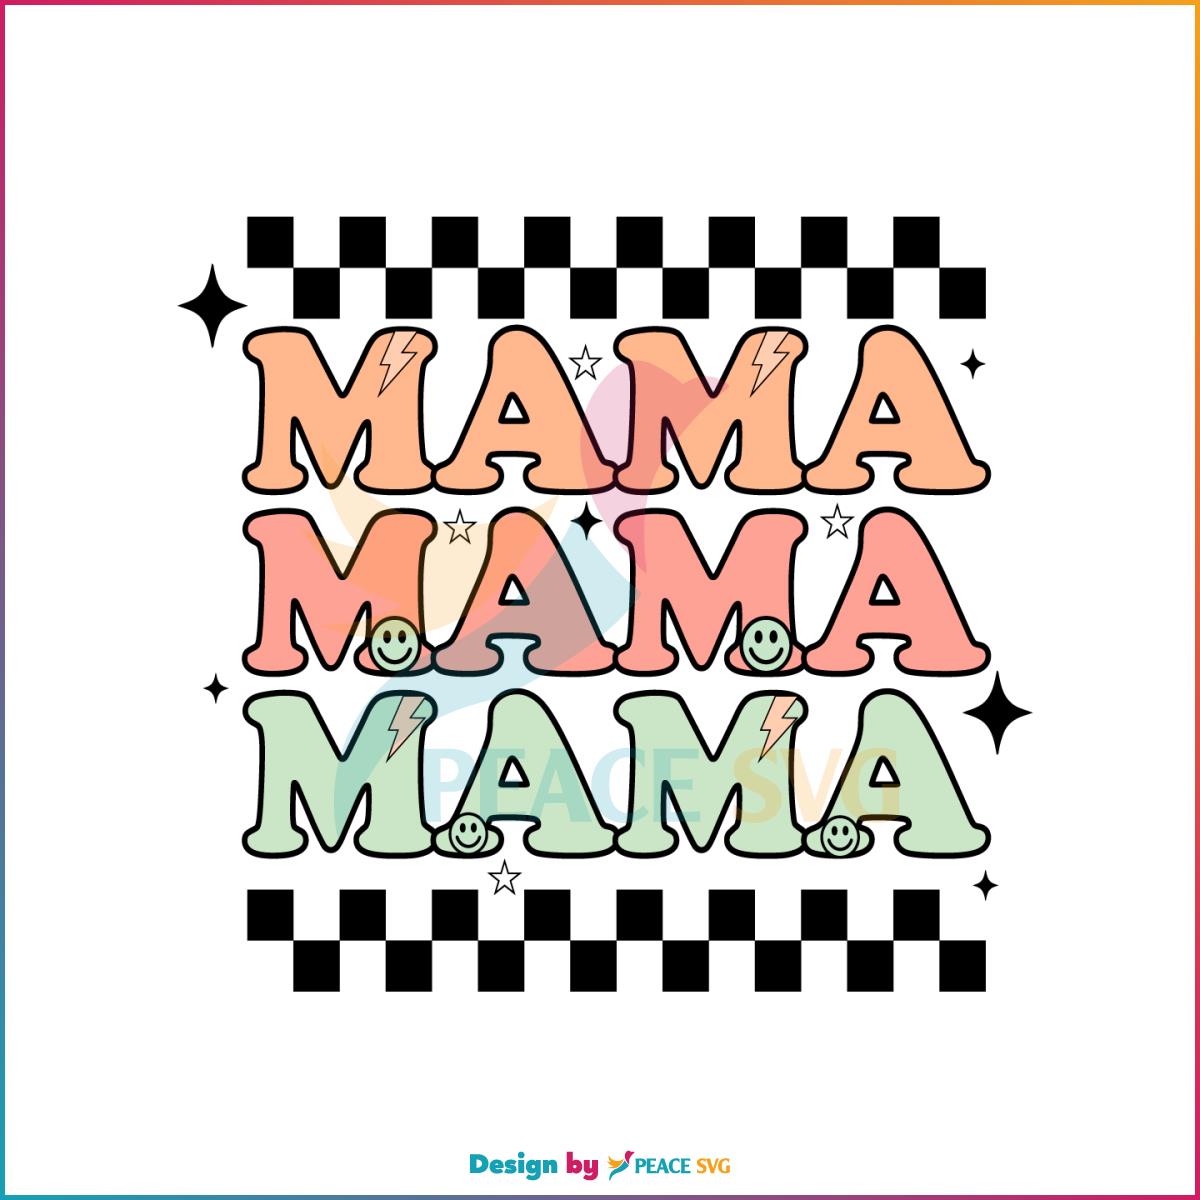 Retro Groovy Mama Funny Mothers Day Svg Cutting Files » PeaceSVG